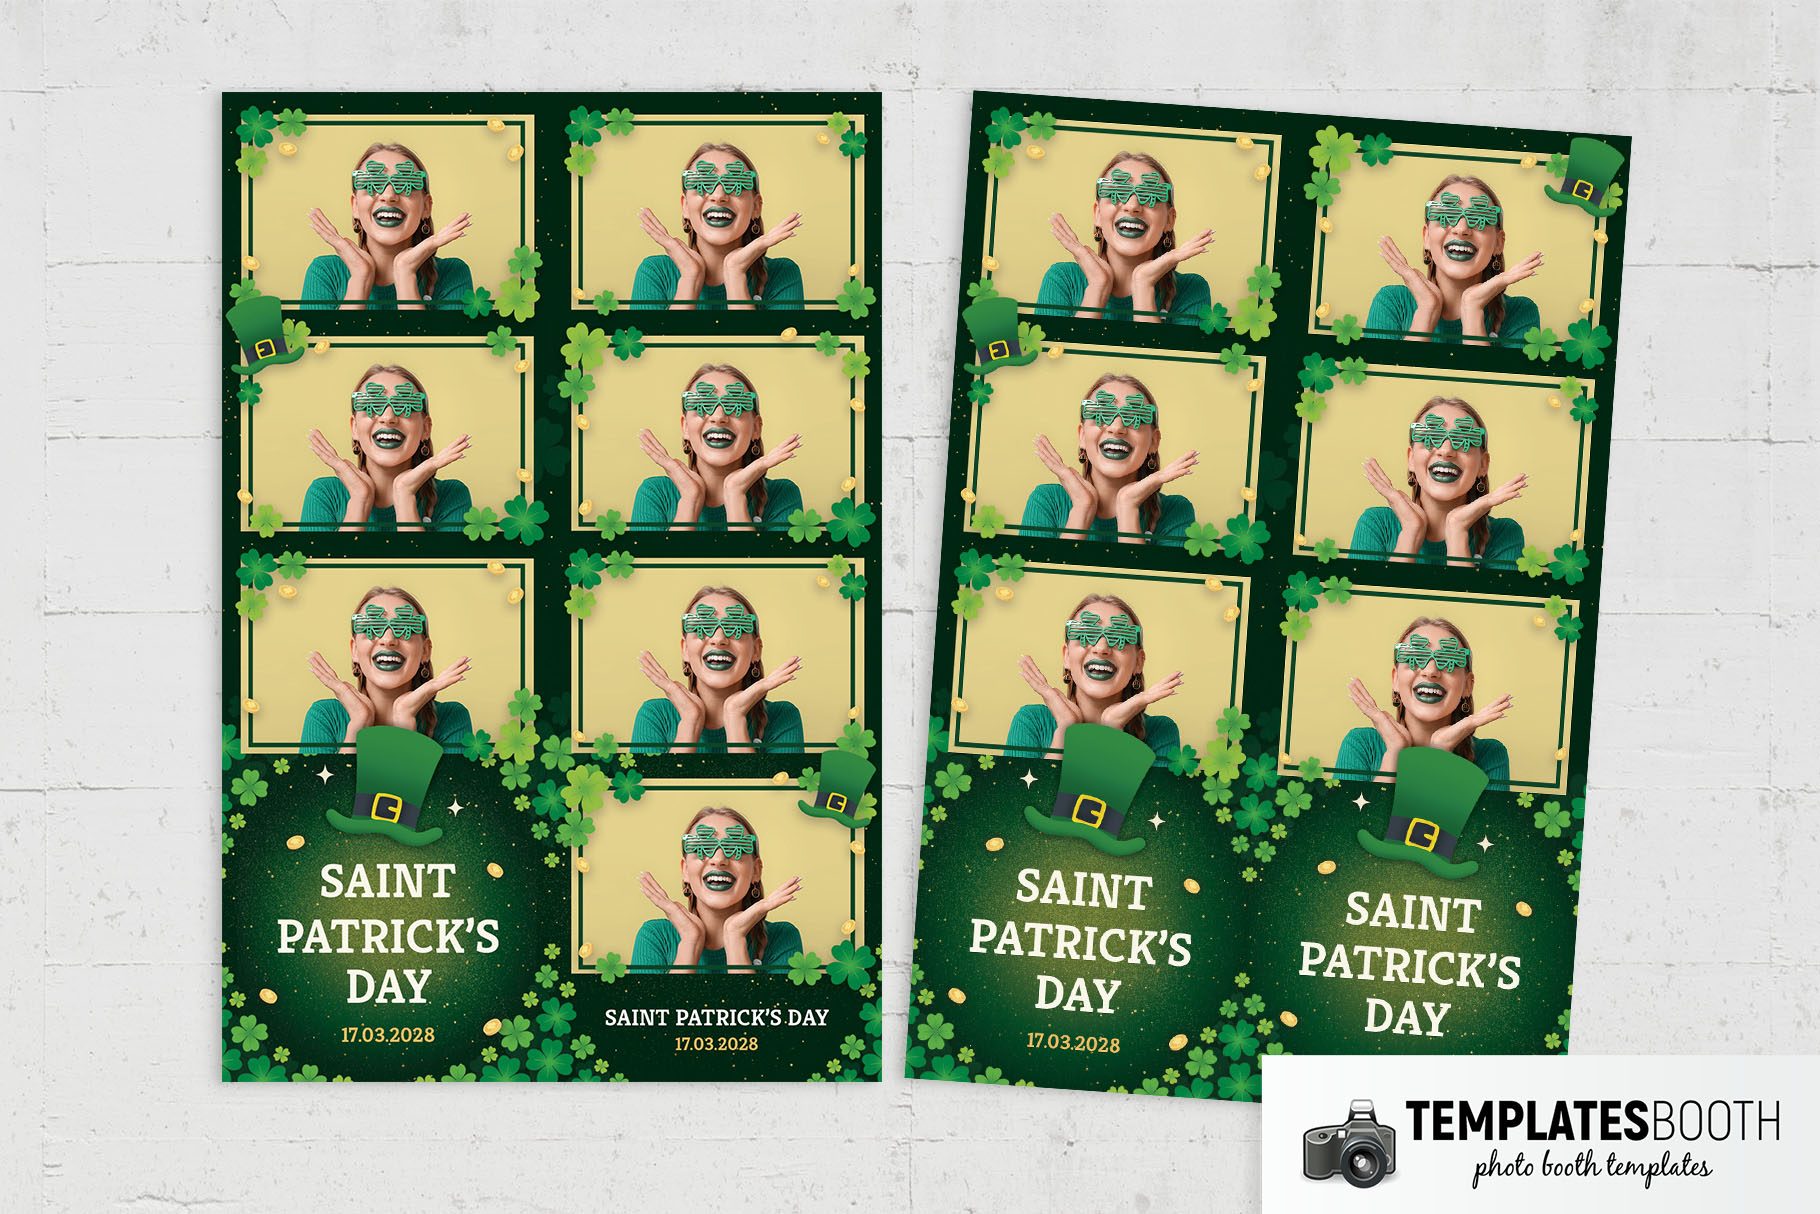 Saint Patrick's Day Photo Booth Template